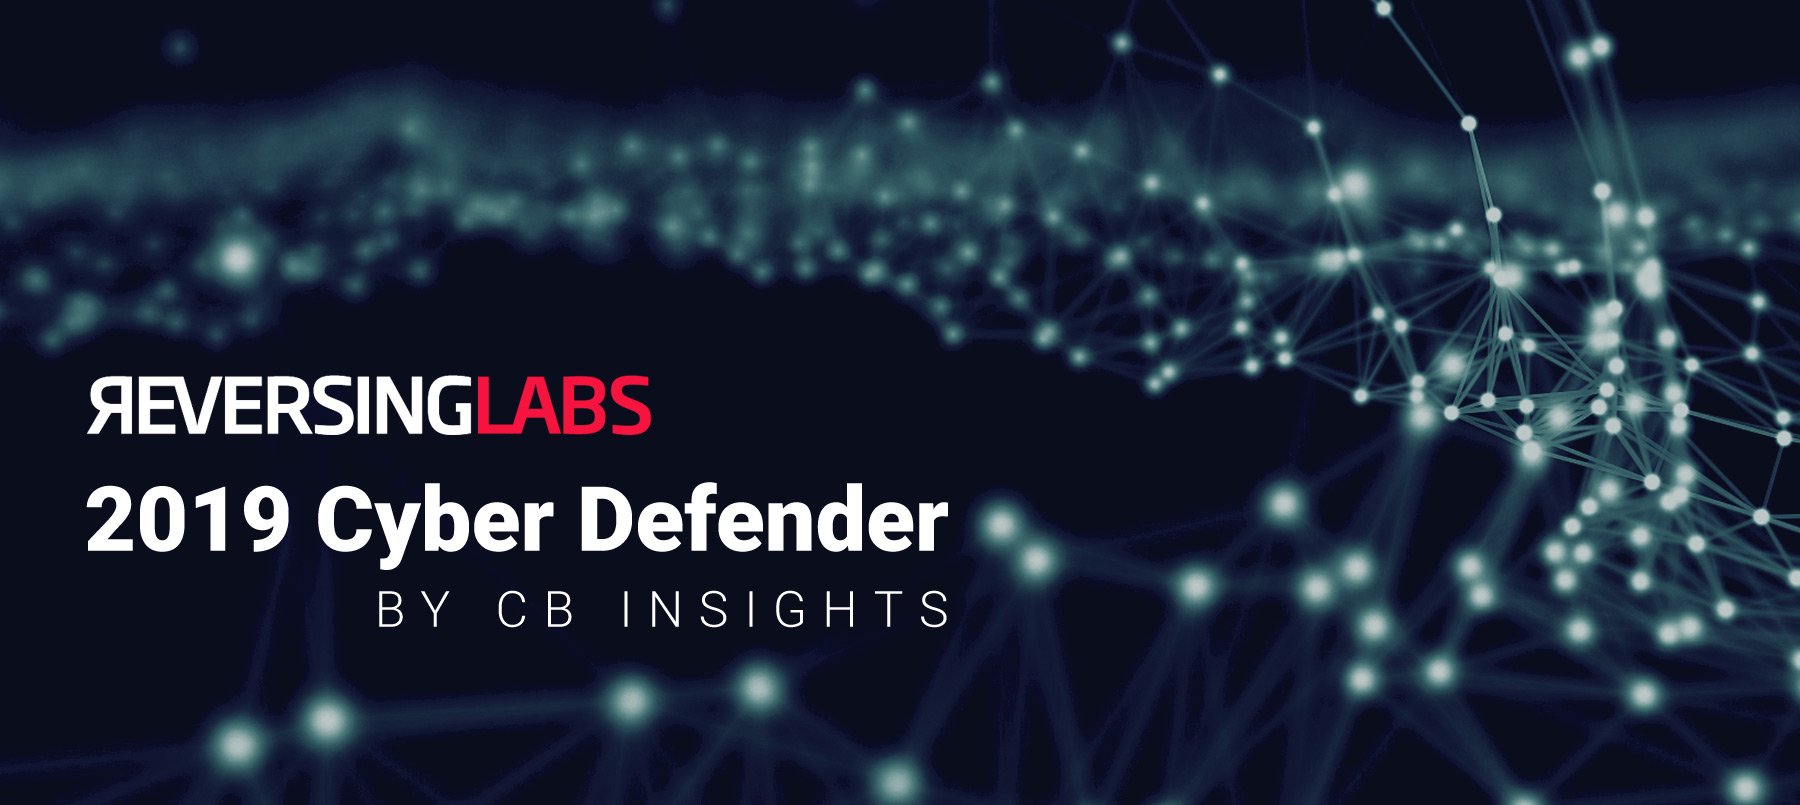 ReversingLabs Recognized by CB Insights as a 2019 Cyber Defender